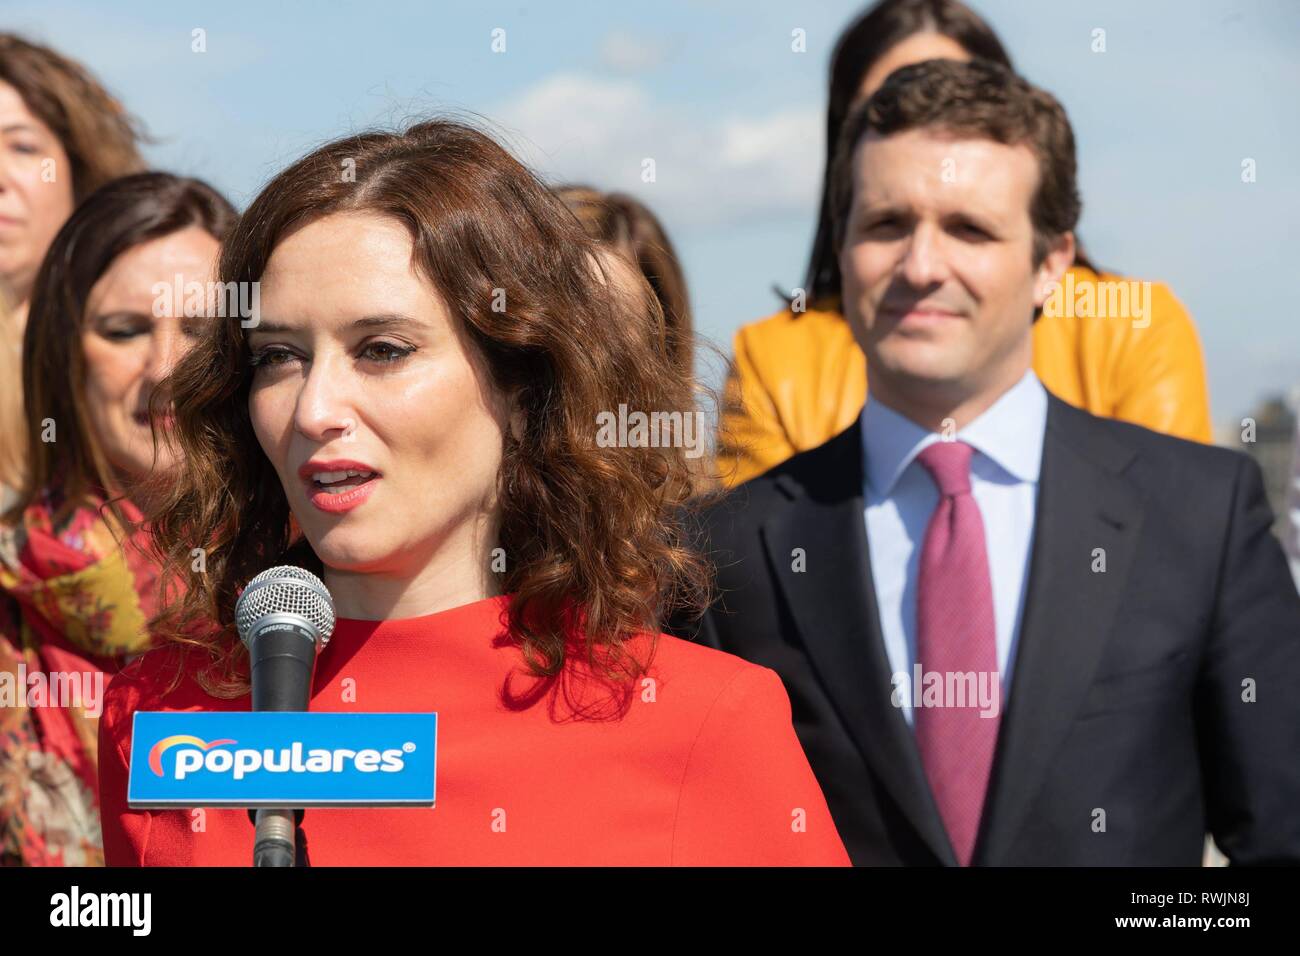 Isabel Diaz-Ayuso, candidate for president of Community of Madrid, seen talking about the event with regional and municipal PP candidates on the occasion of International Women's Day.  Cordon Press Stock Photo